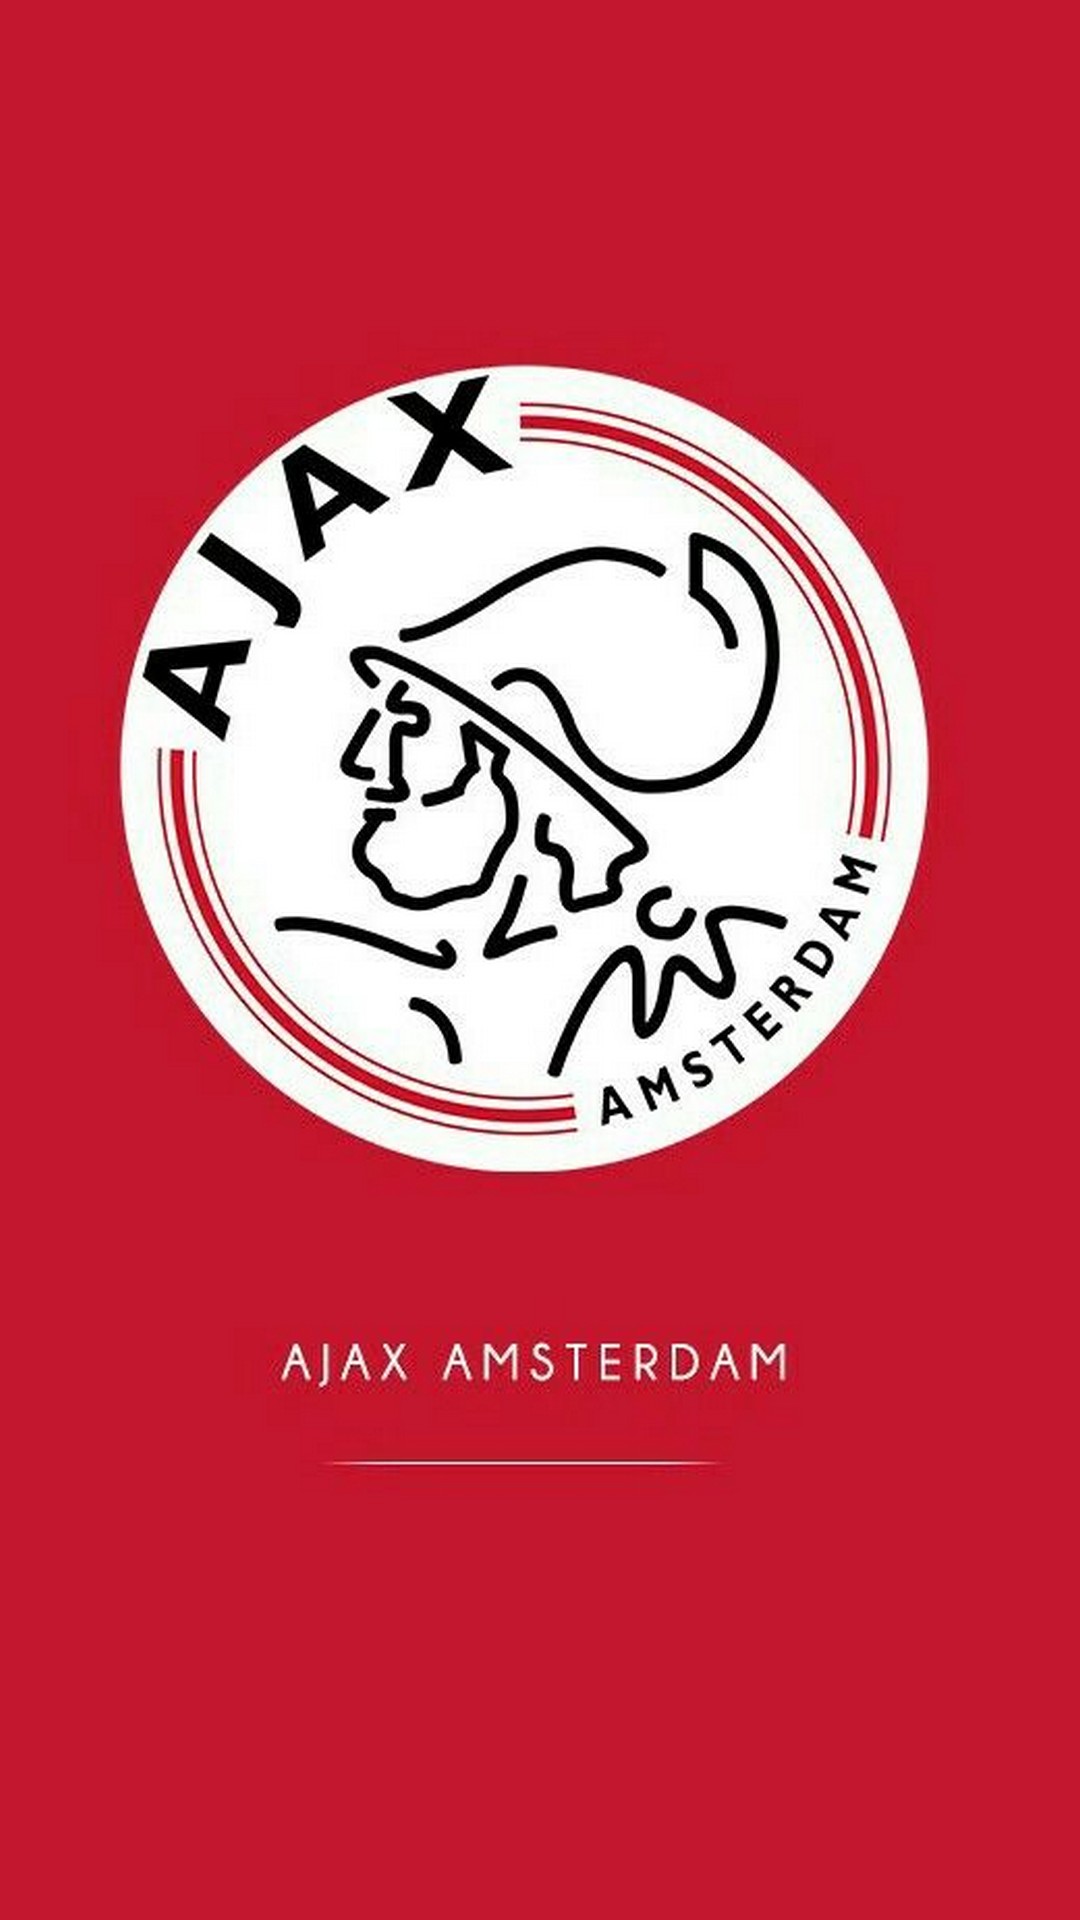 Wallpaper iPhone Ajax with high-resolution 1080x1920 pixel. You can use this wallpaper for your iPhone 5, 6, 7, 8, X, XS, XR backgrounds, Mobile Screensaver, or iPad Lock Screen